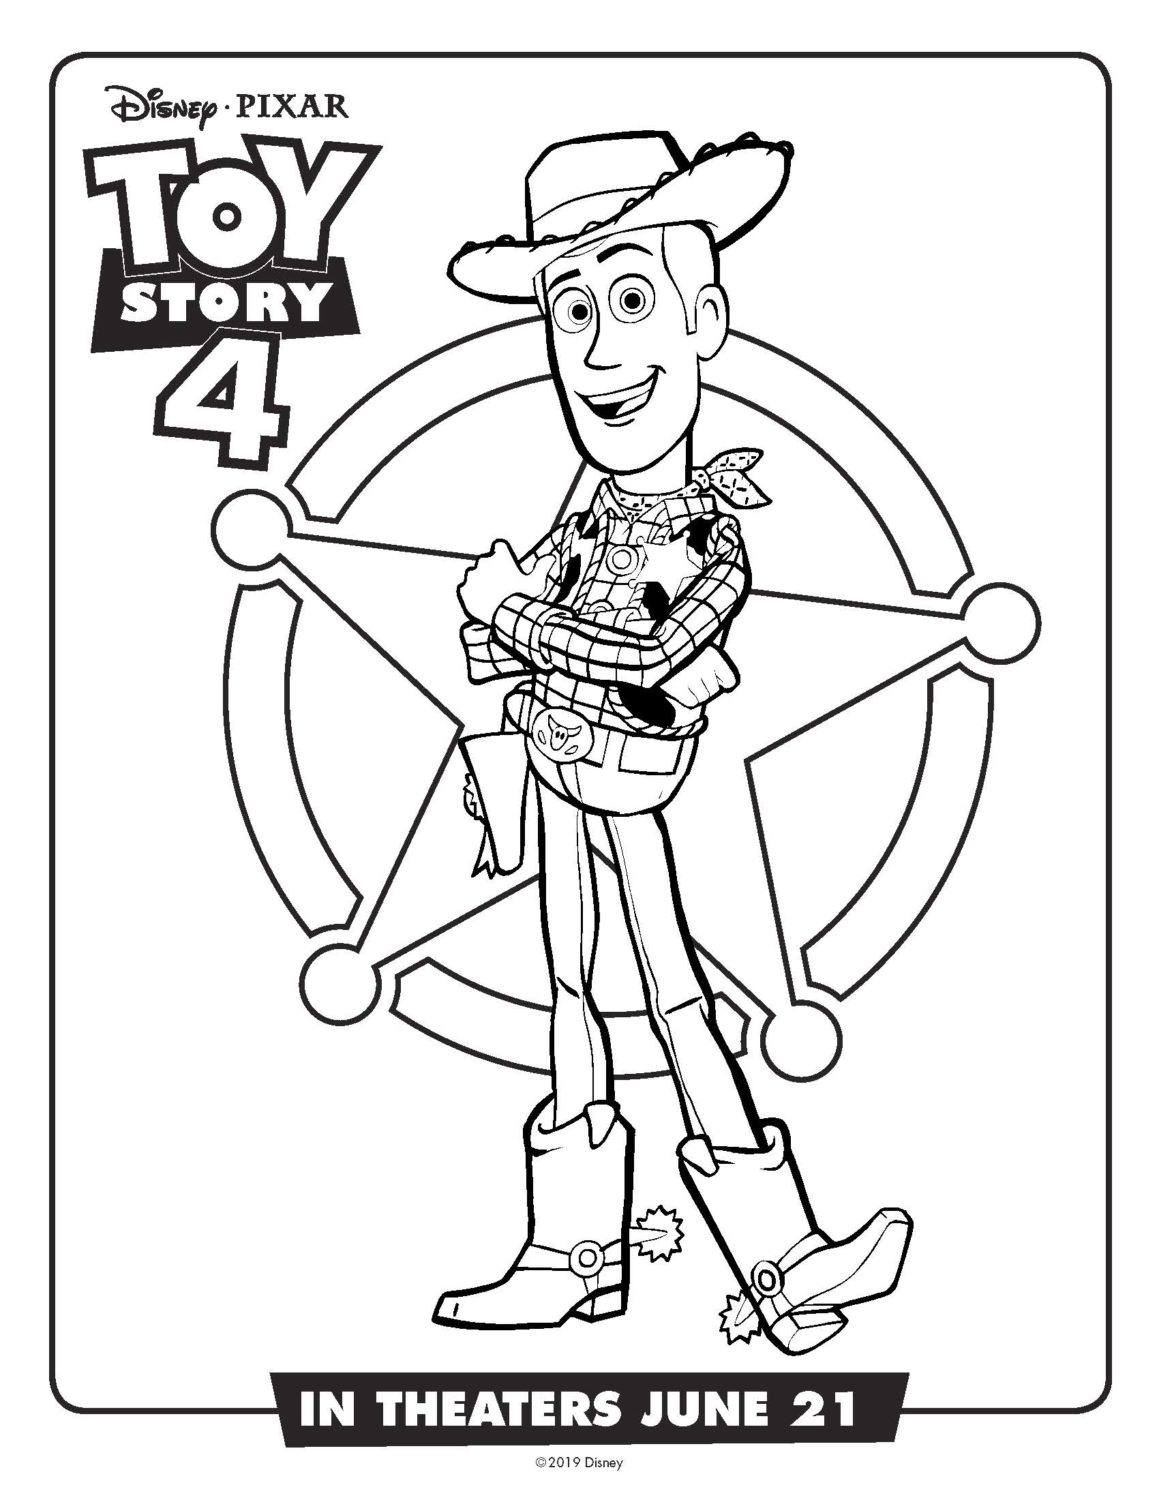 Free Printable Toy Story 4 Coloring Pages and Activity